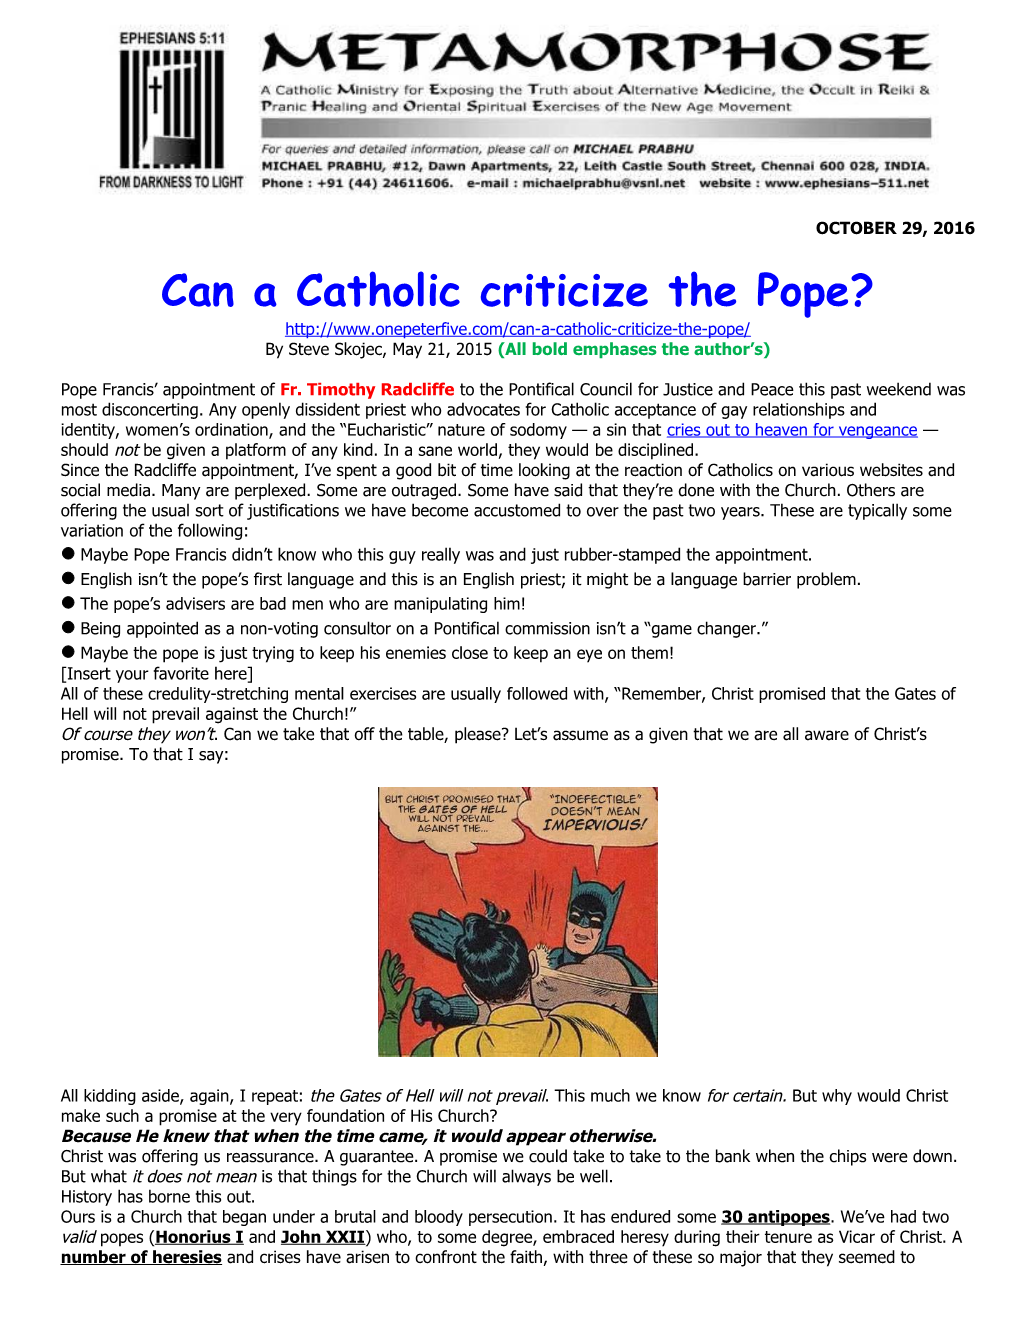 Can a Catholic Criticize the Pope?